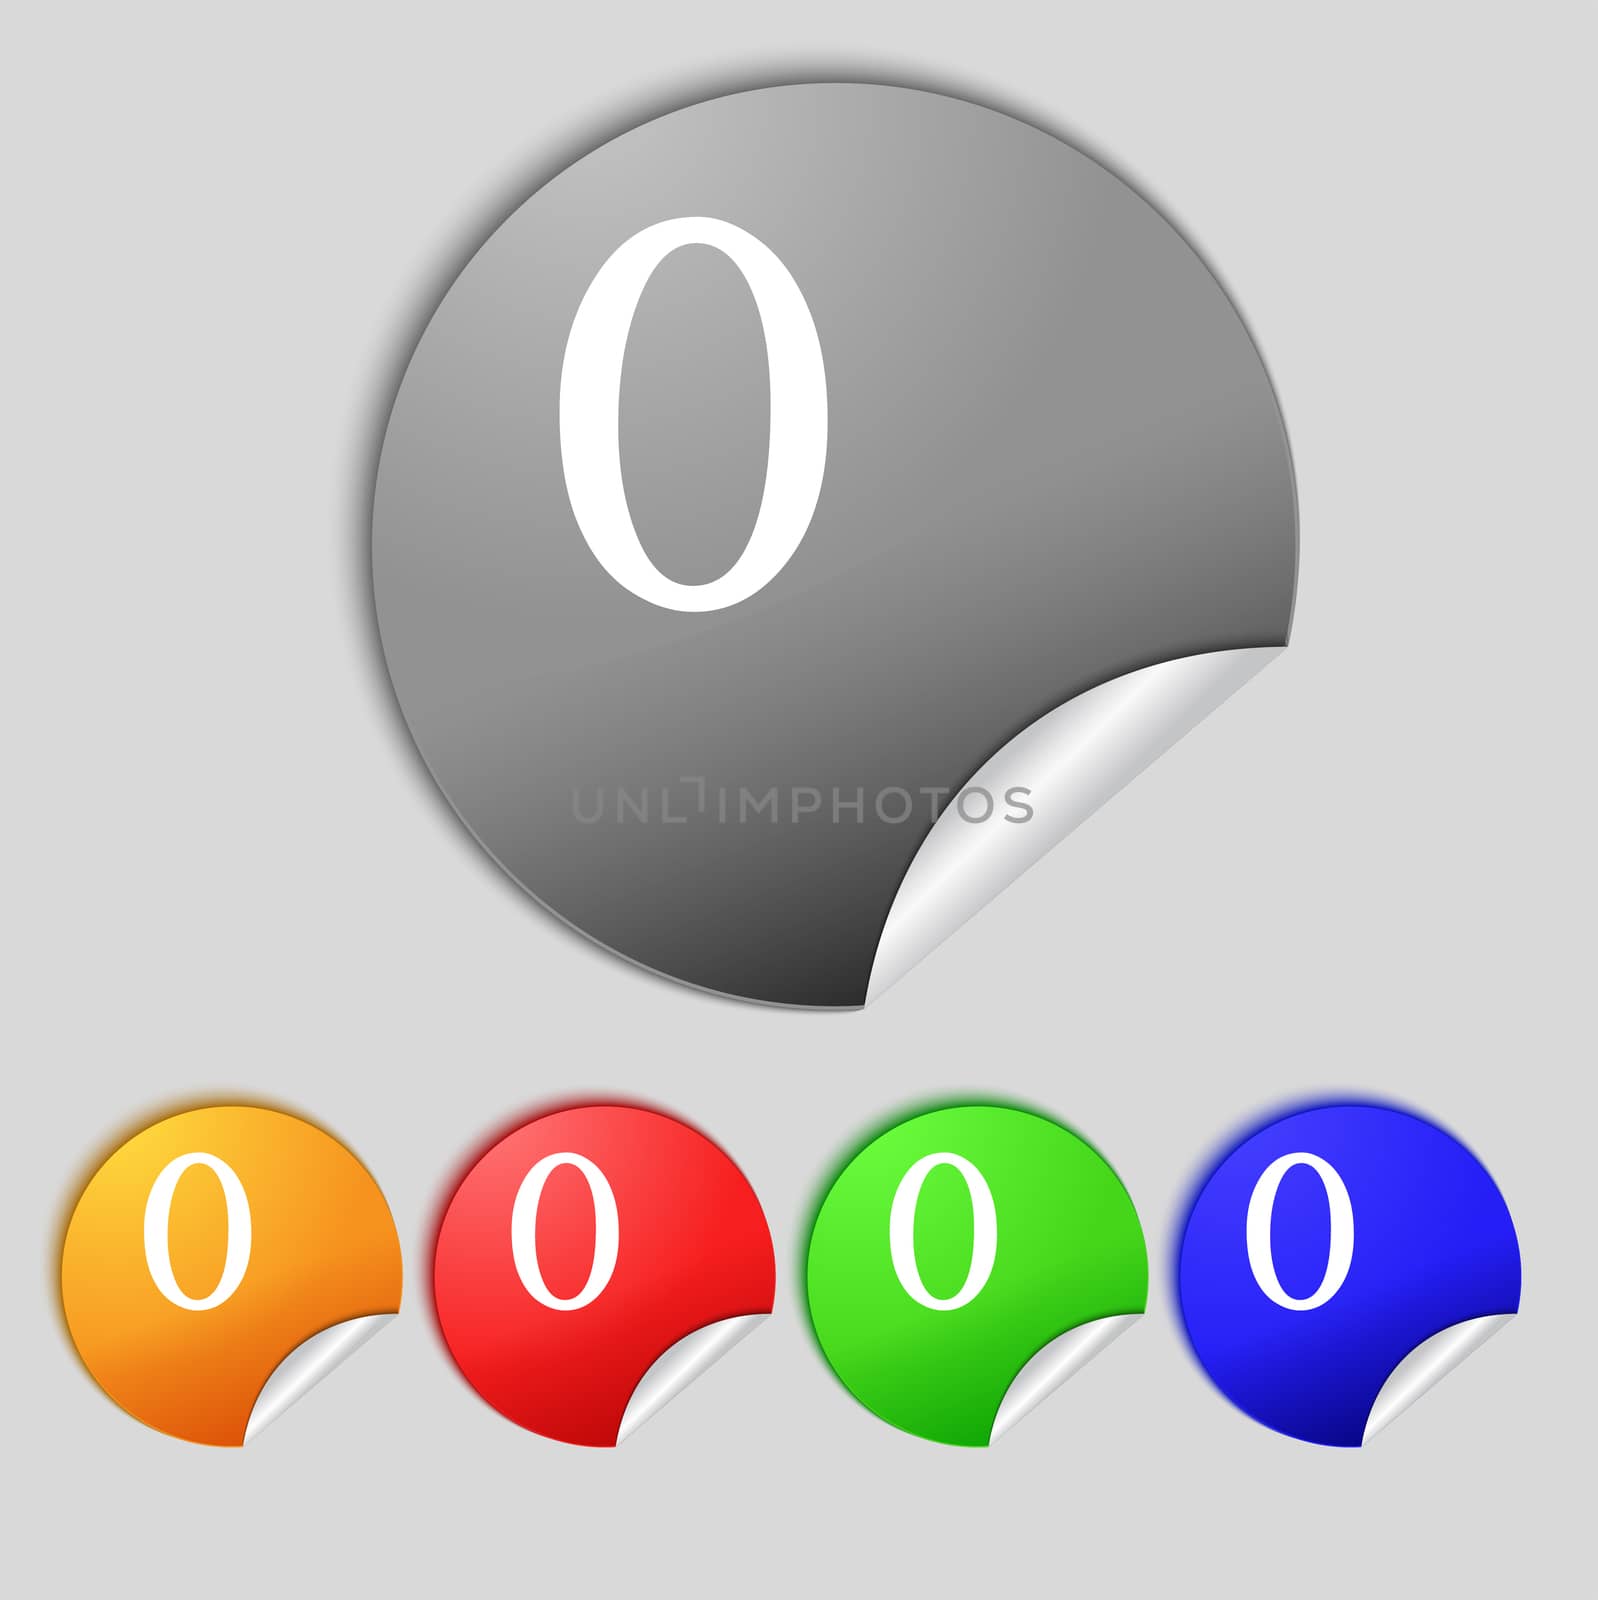 number zero icon sign. Set of coloured buttons. illustration